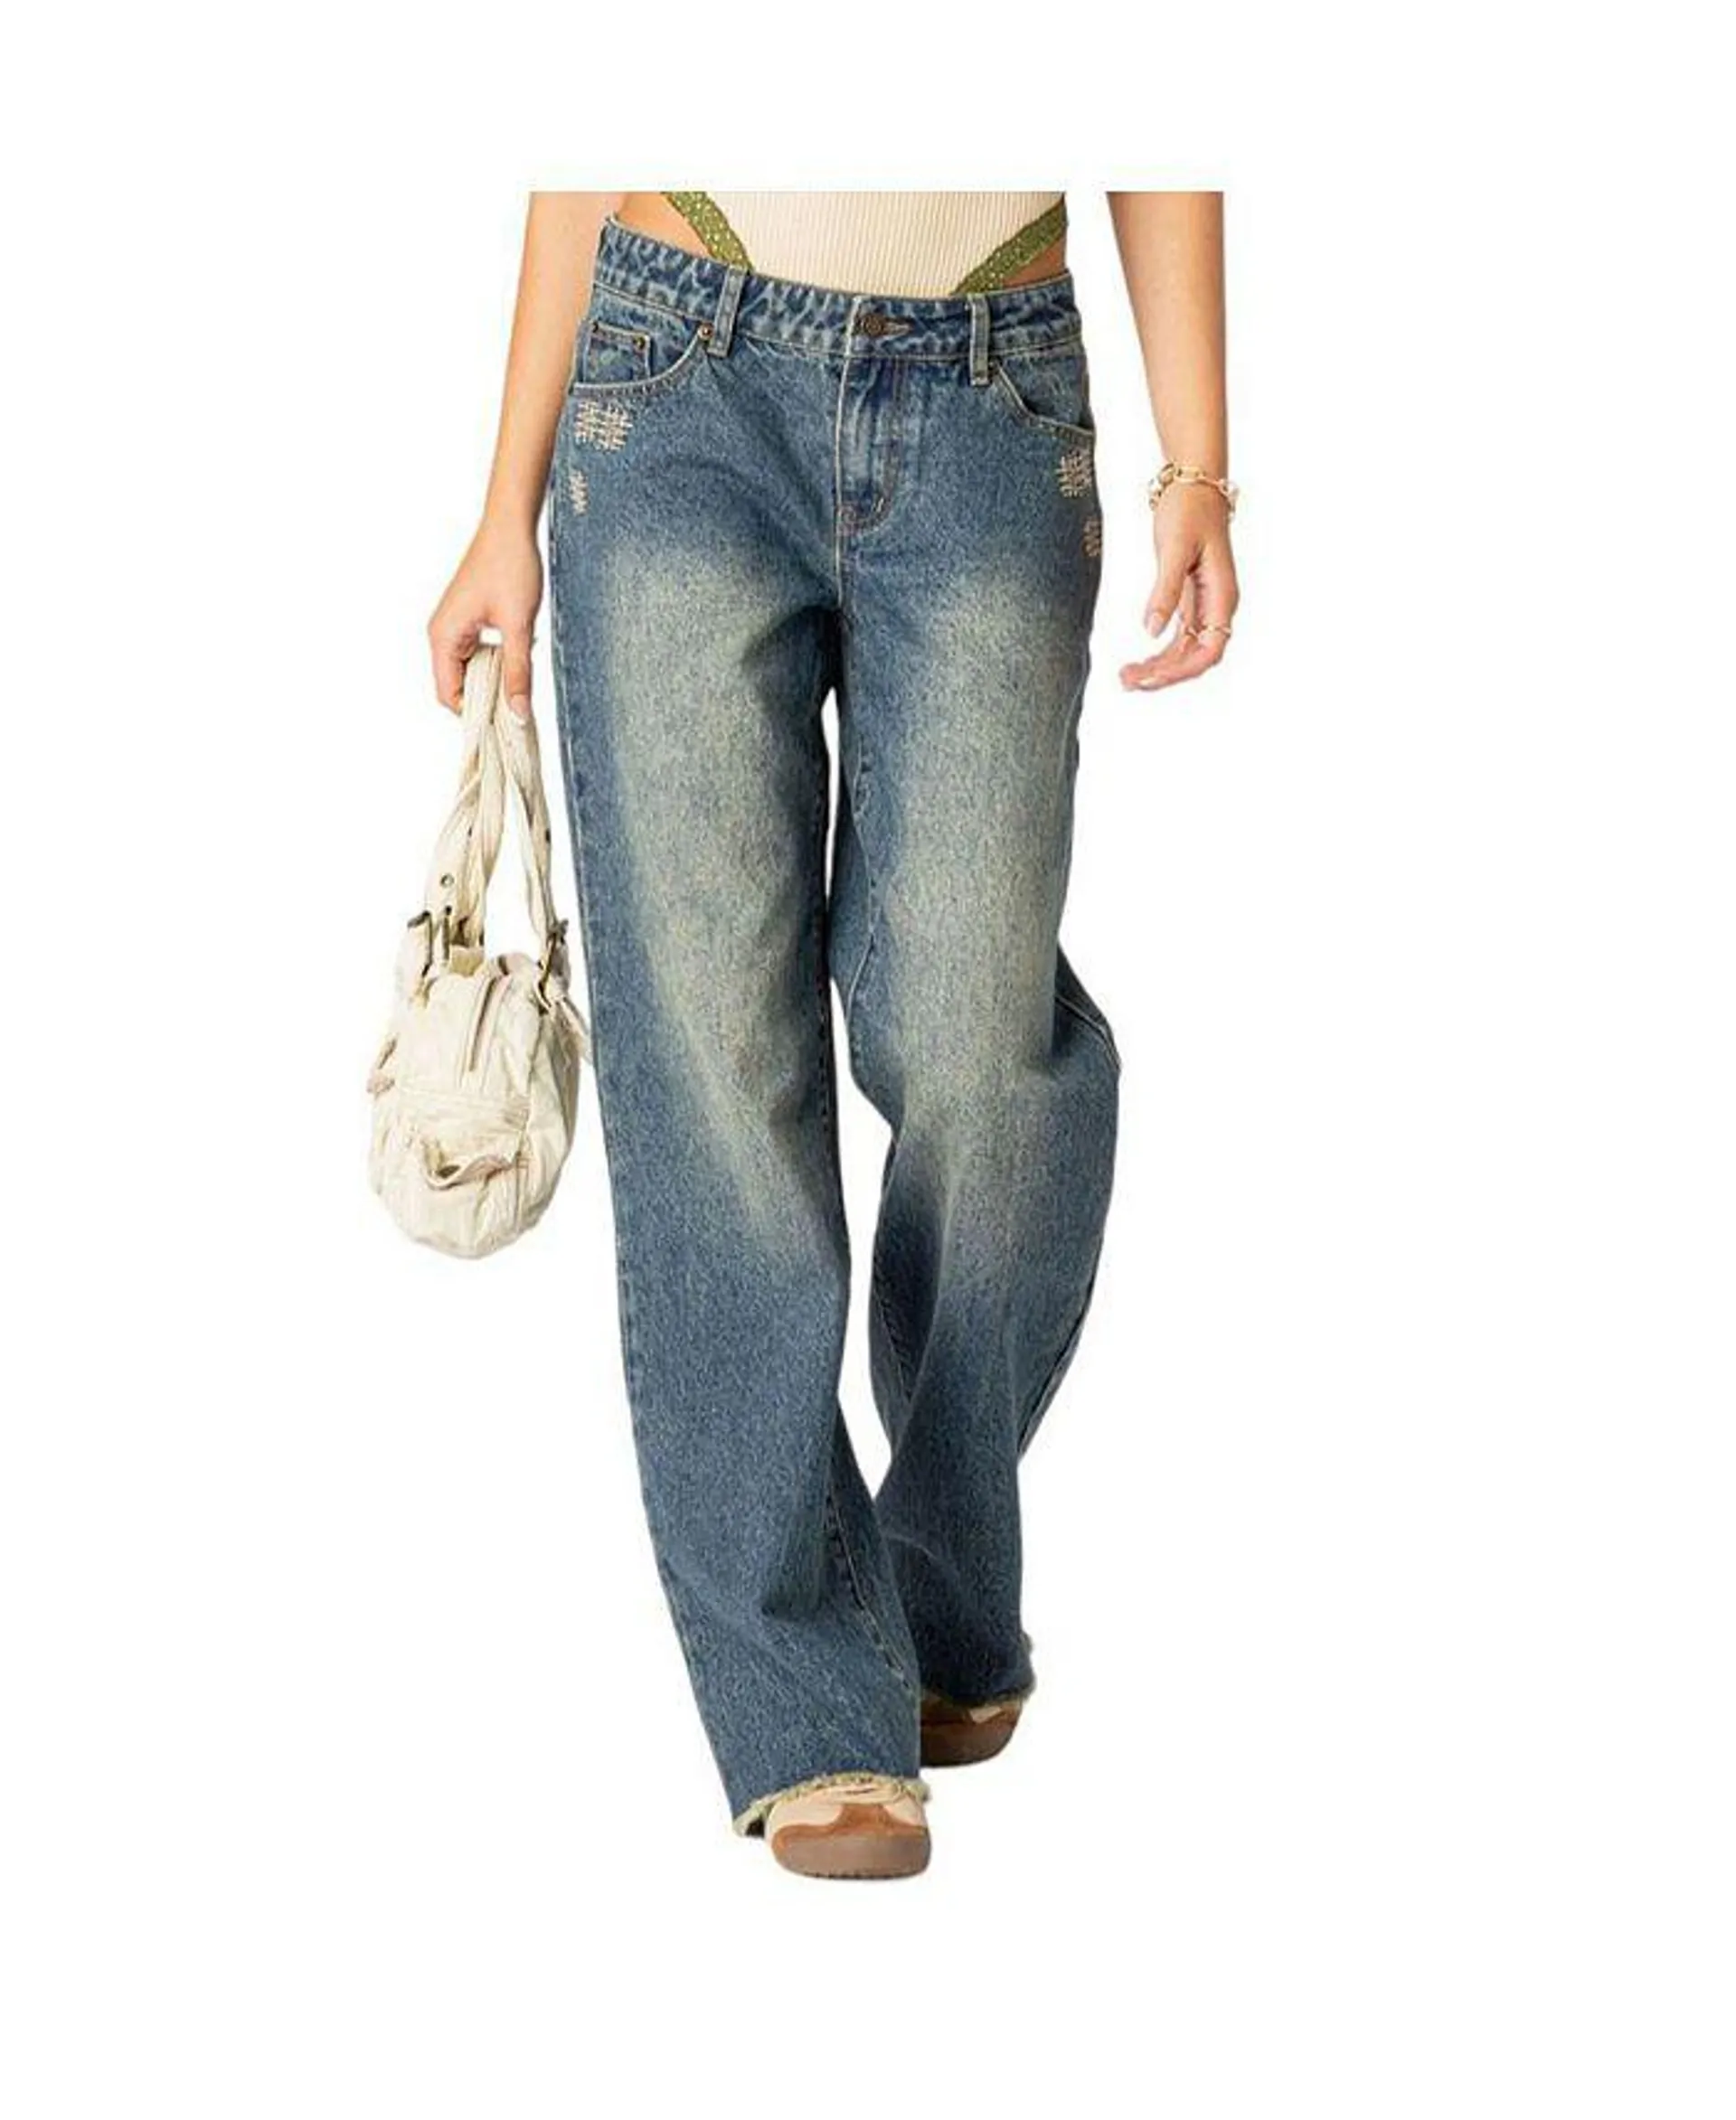 Women's Doll House low rise washed jeans